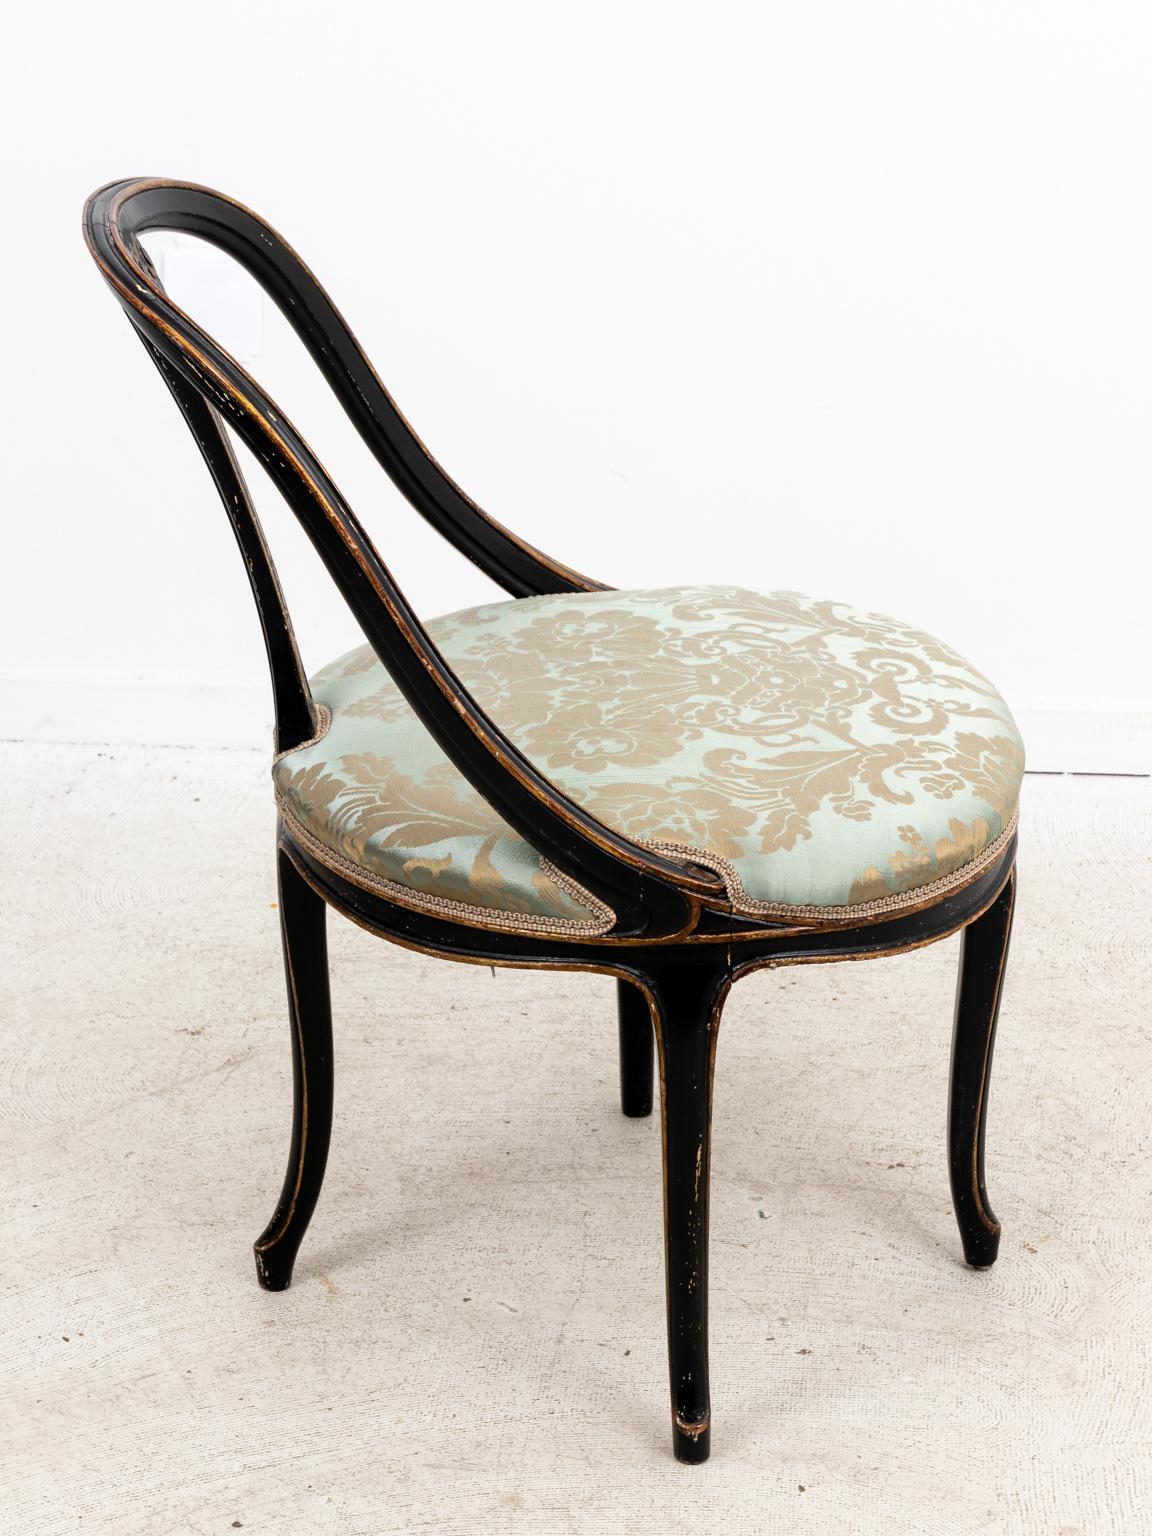 Upholstery Black Decorated Corner Chair